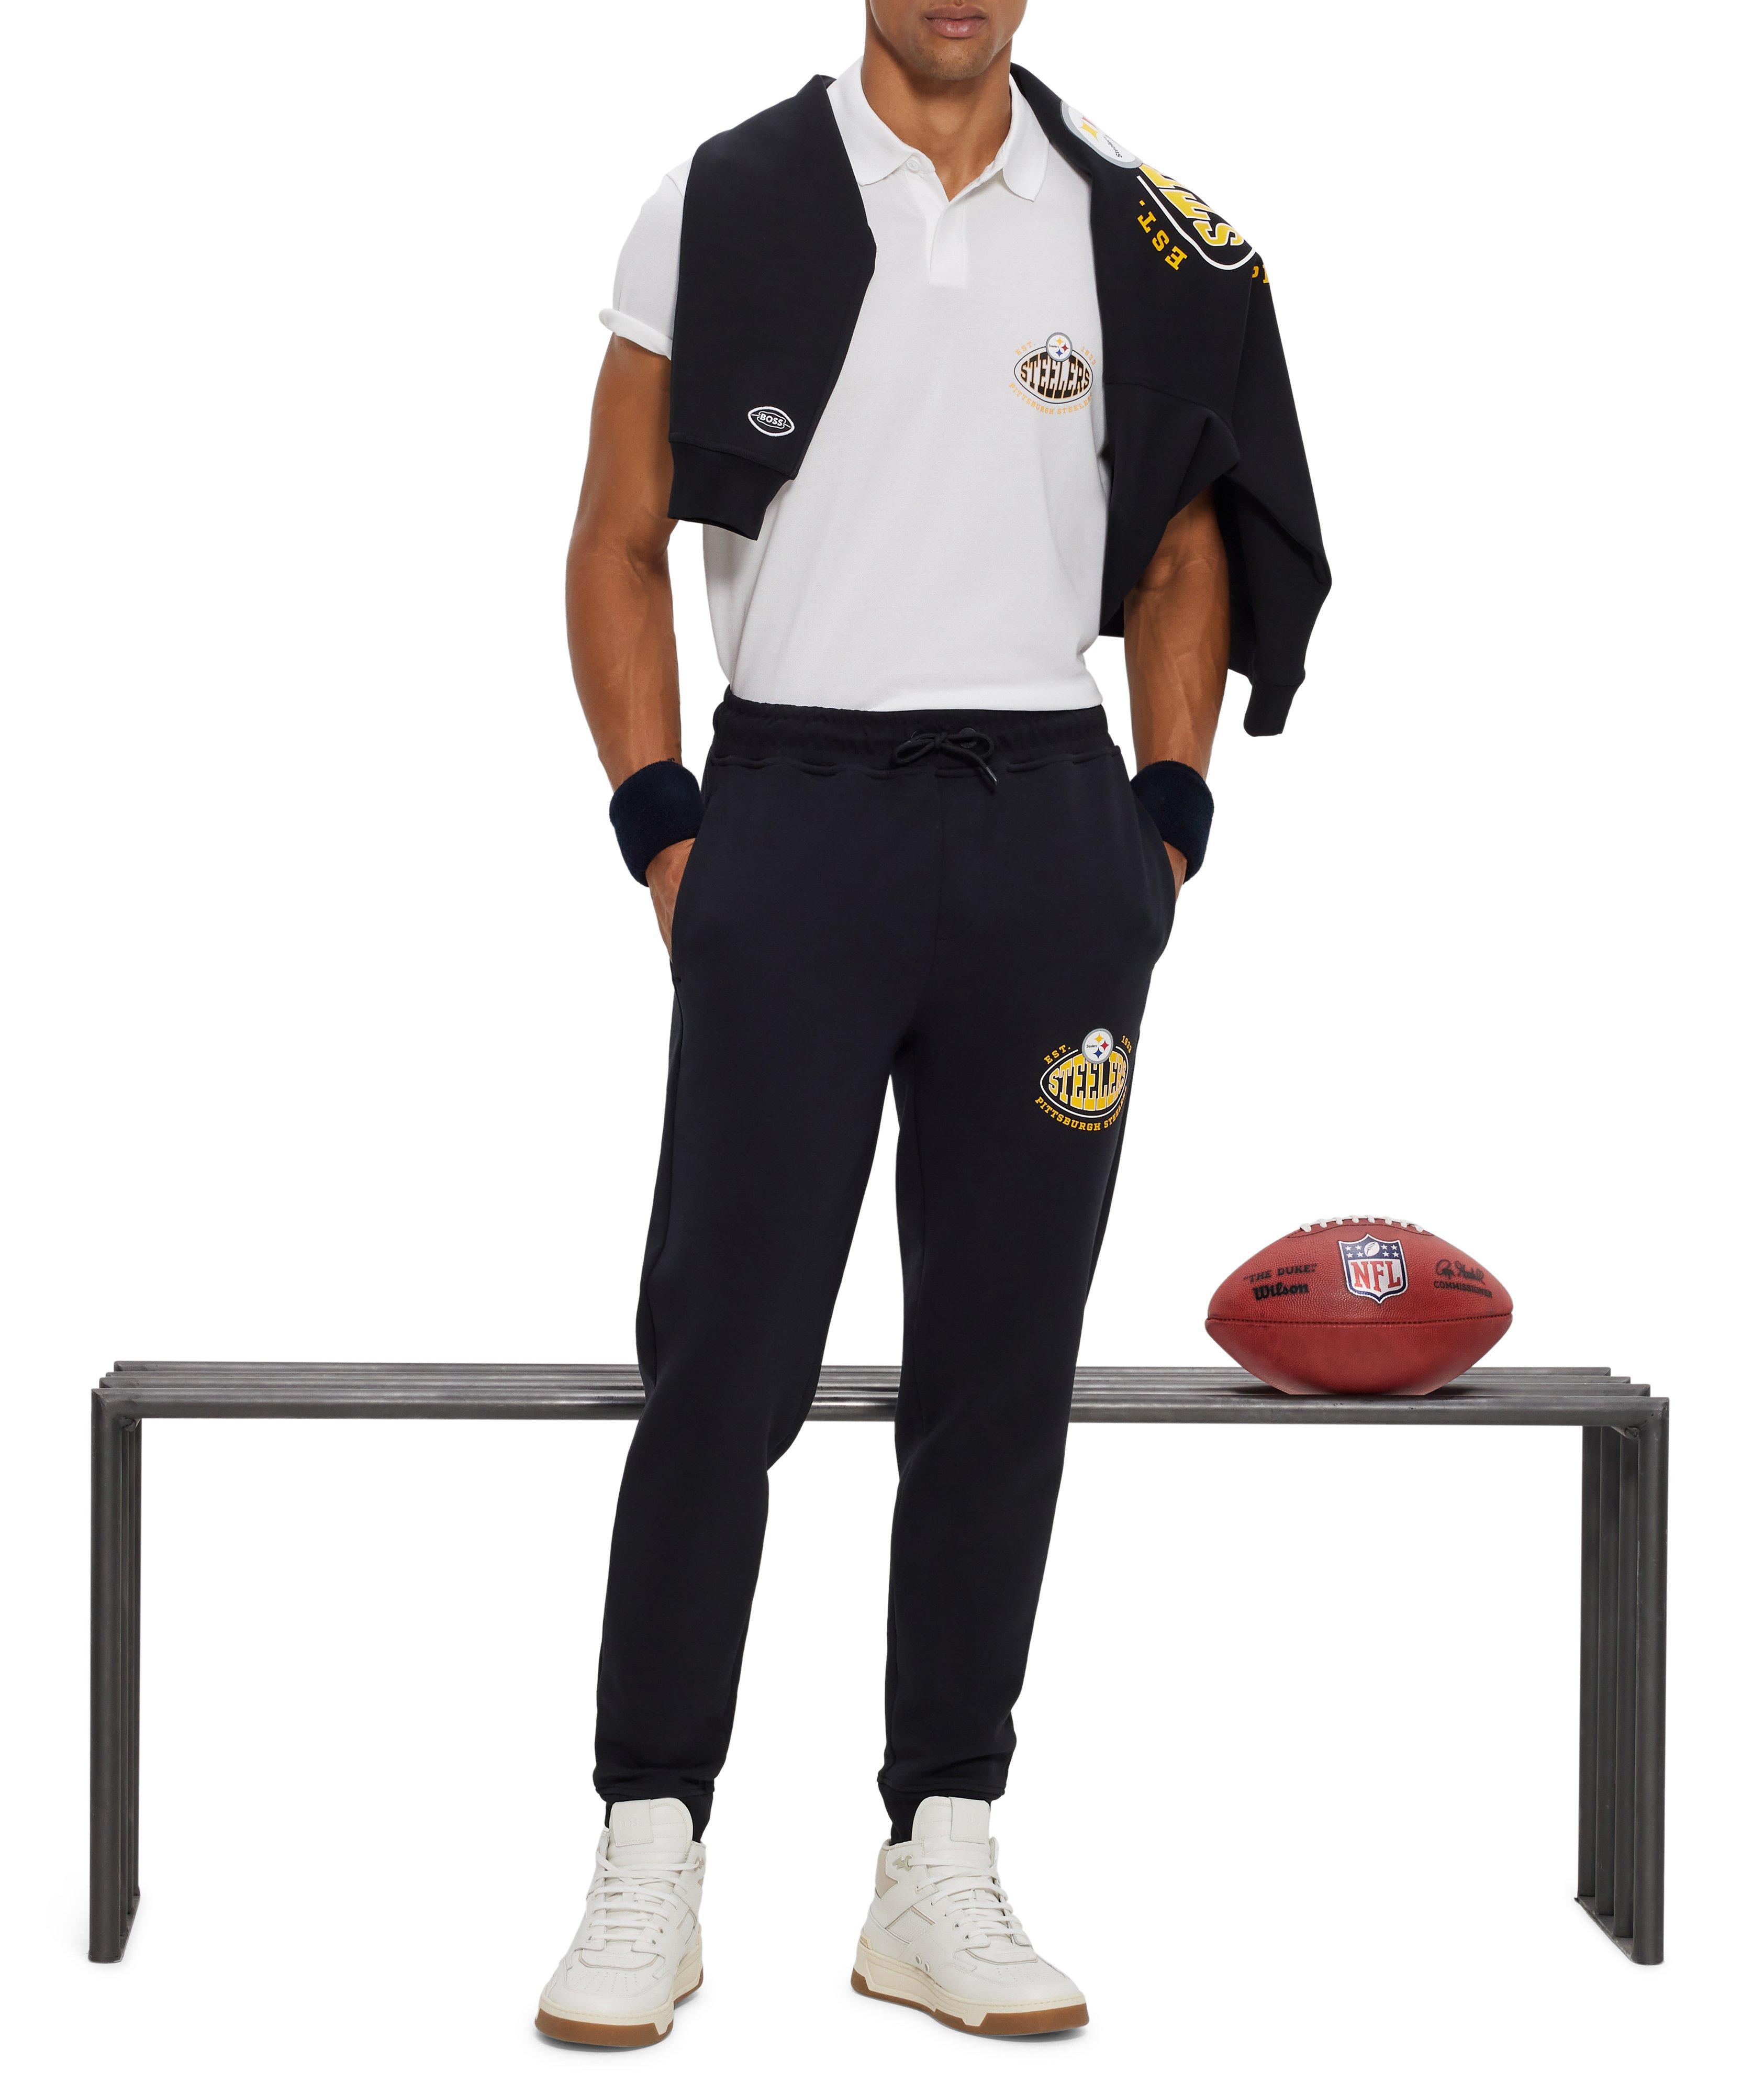 NFL Collection Pittsburgh Steelers Polo image 4